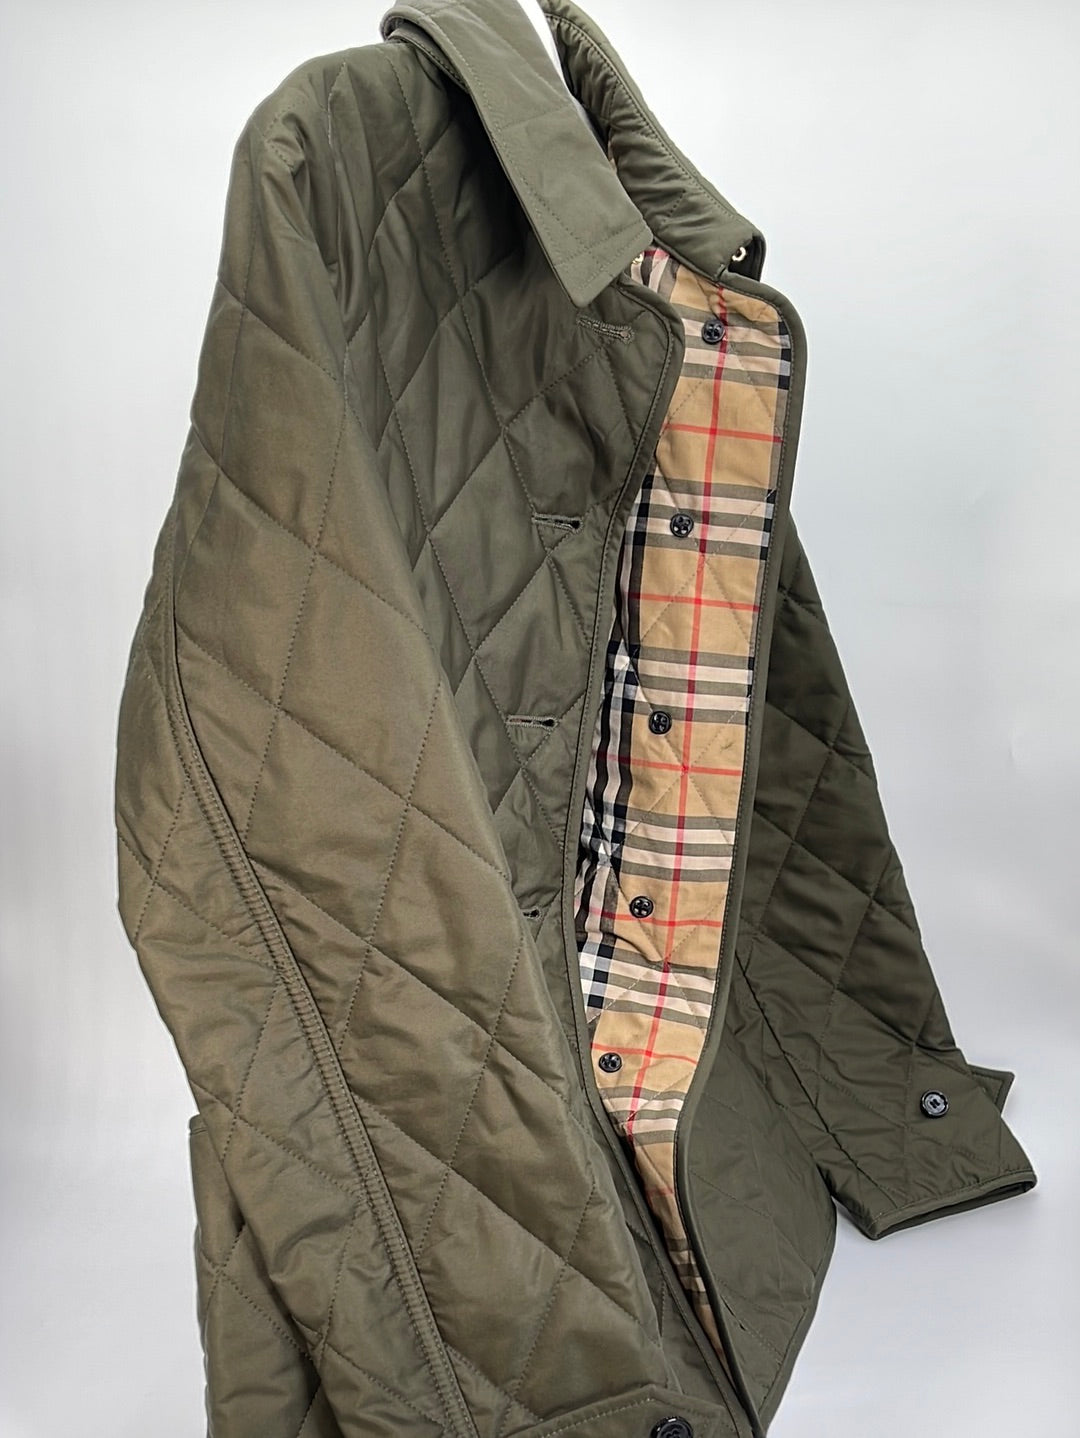 (New Condition With Tags) Burberry Dark Green Thermoregulated Jacket 291 030223